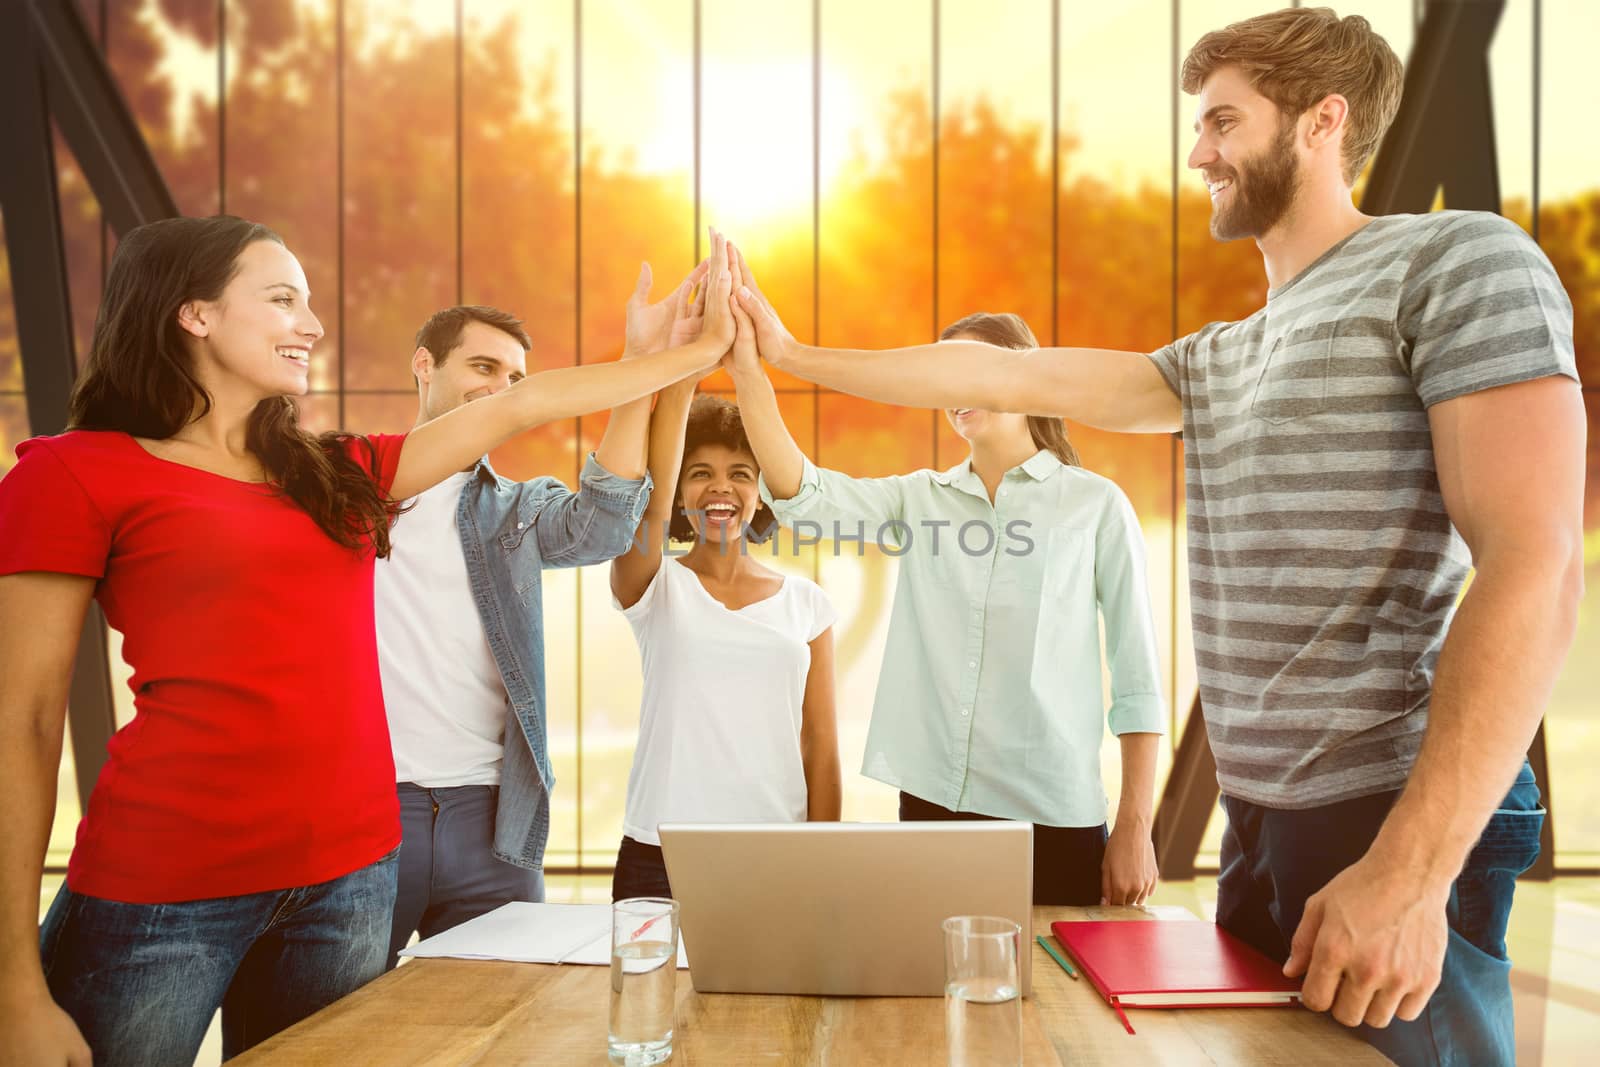 Composite image of happy business team putting their hands together by Wavebreakmedia